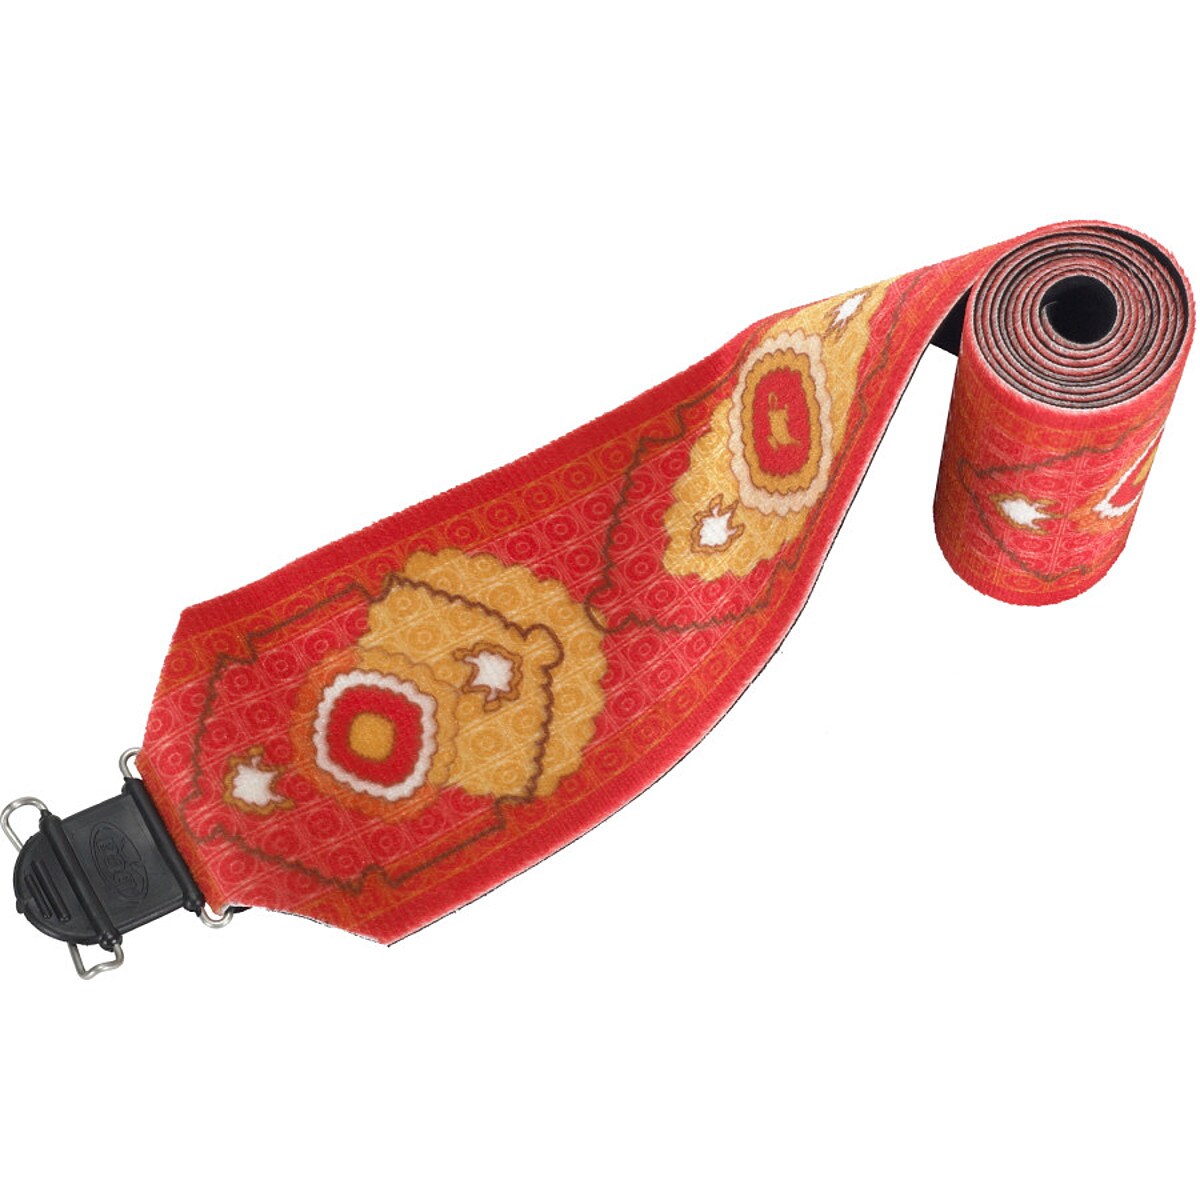 Backcountry Access Magic Carpet Skins One Color, 115mm